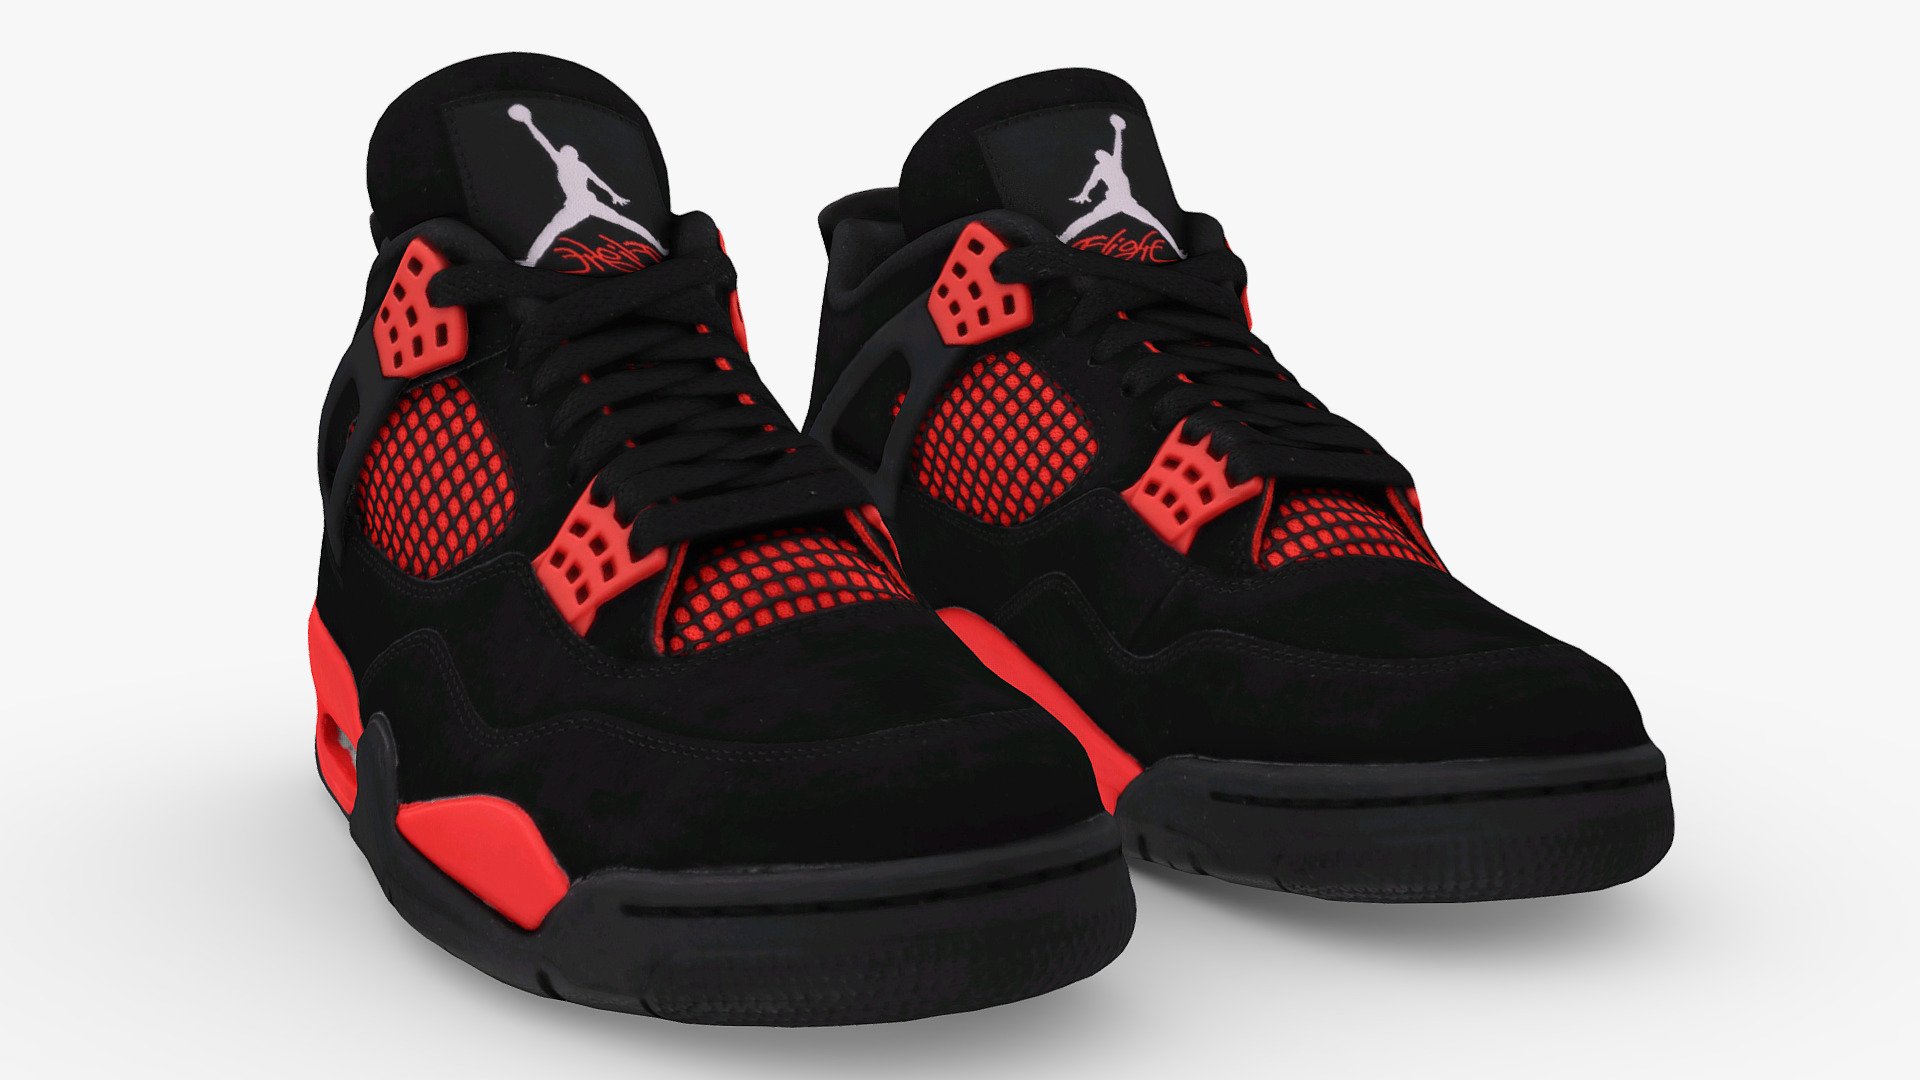 Champs Sports Canada  Time to bring the thunder  the Air Jordan 4  Crimson is now available in mens and kids sizes WeKnowGame Buy   httpsprly6189KB70U  Facebook